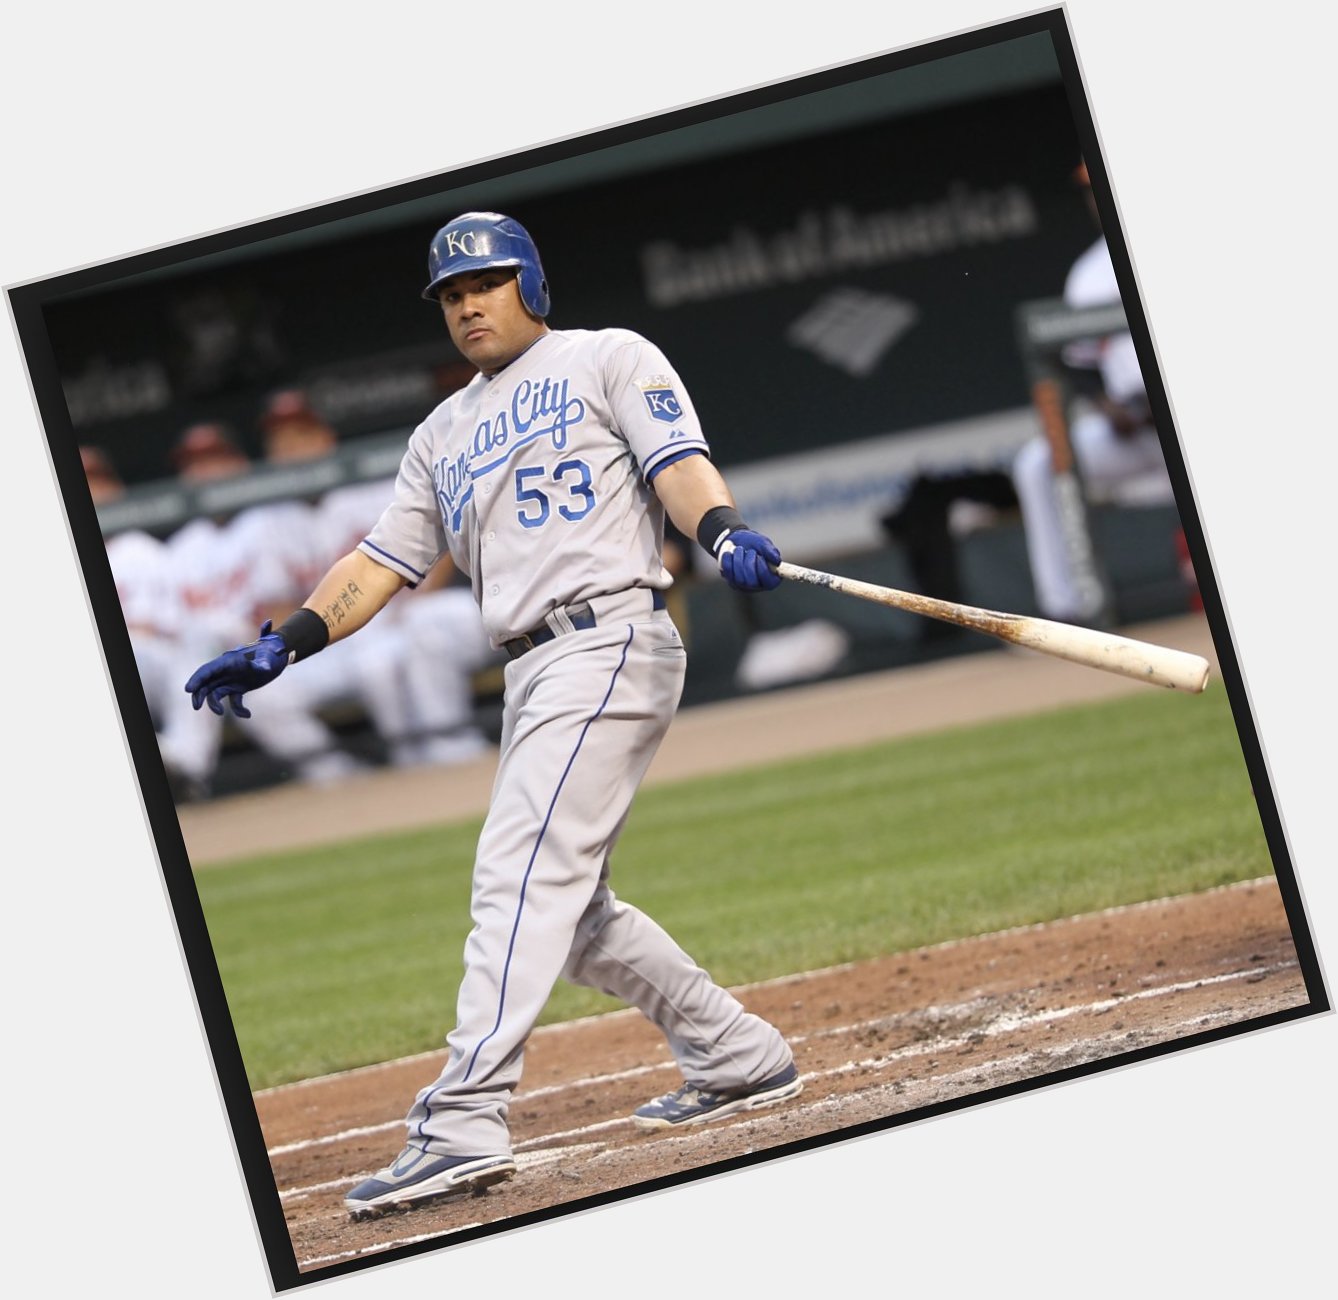 33 years old today. Journeyman OF, now back with the KC Royals. Happy birthday to \"Got Melky\" Cabrera! 